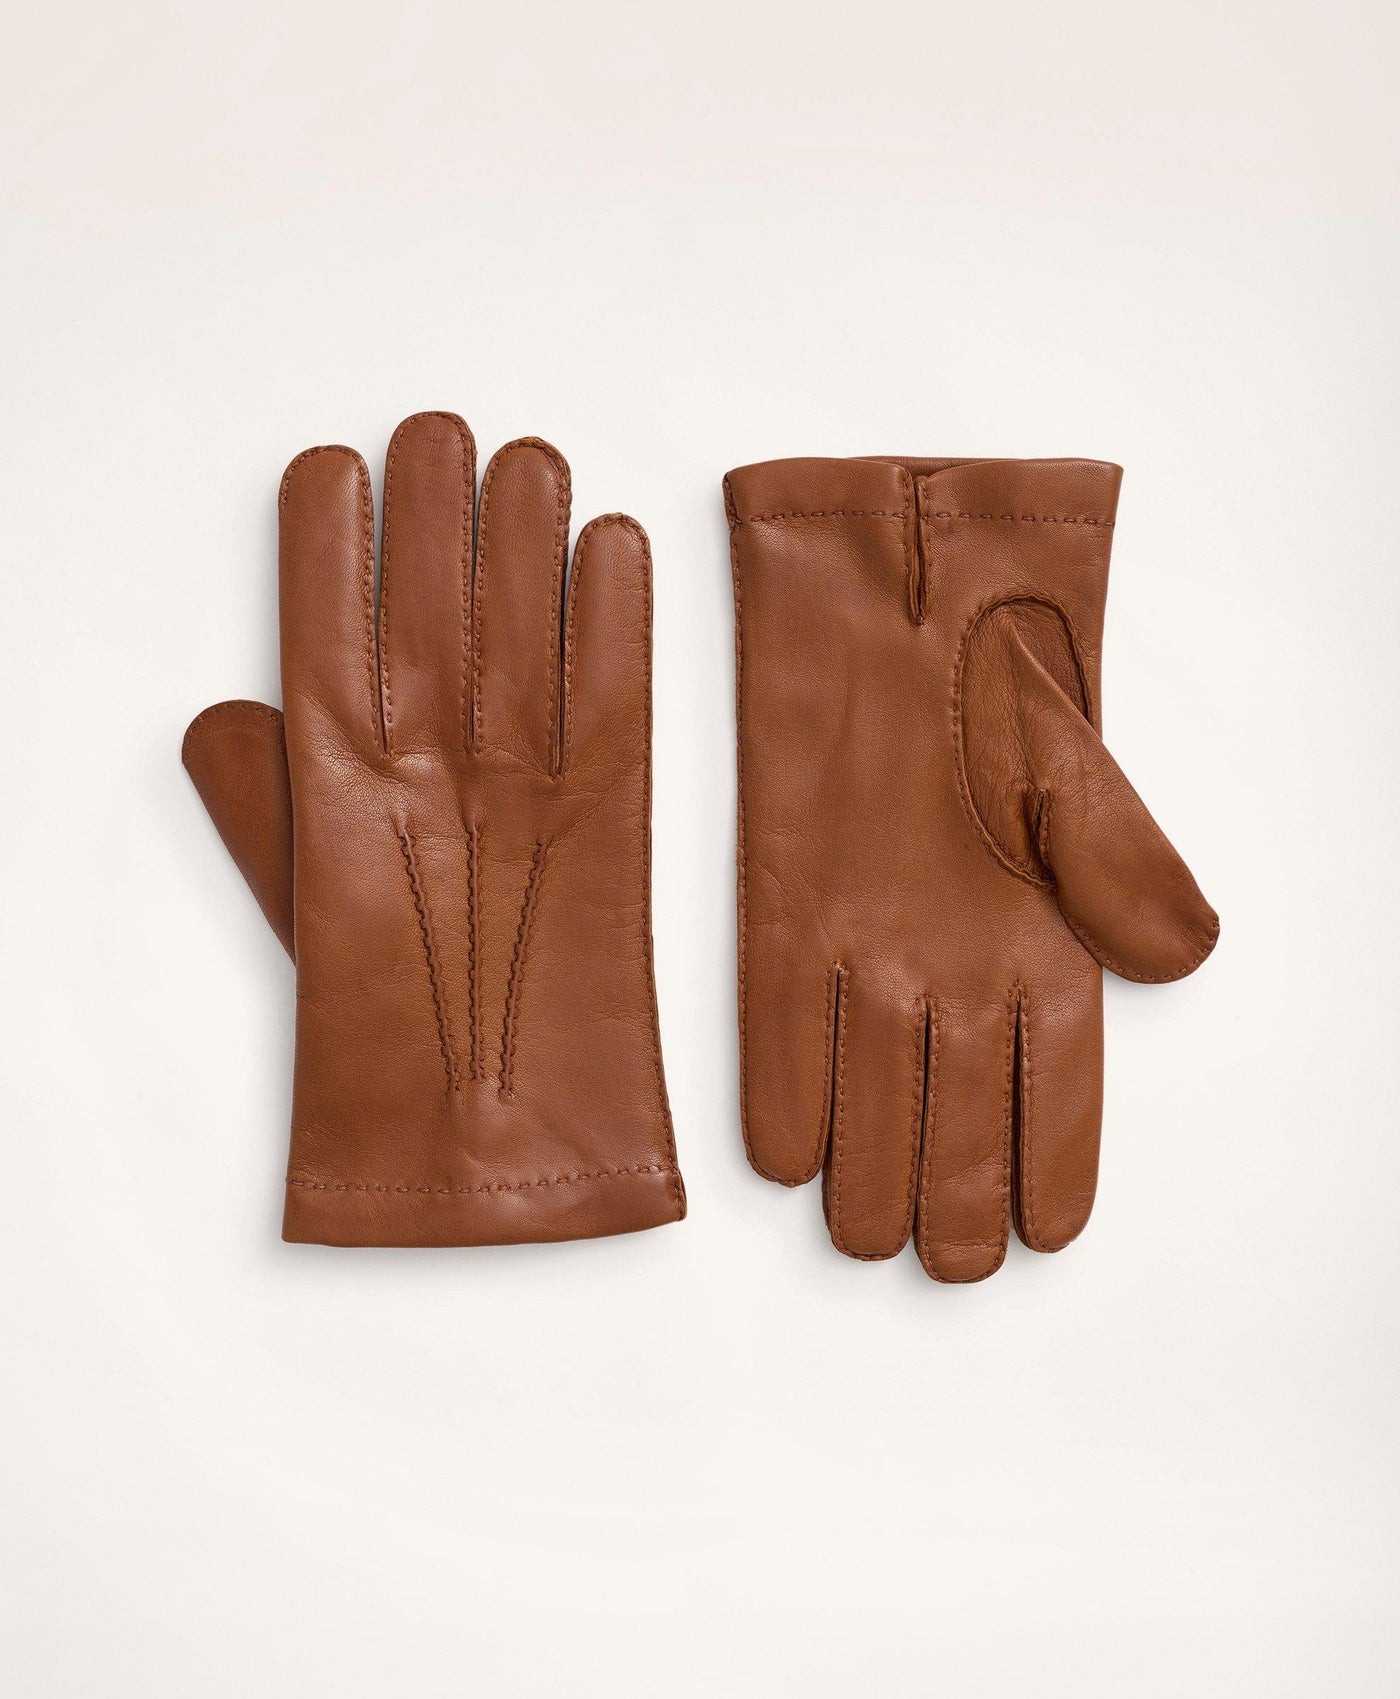 Lambskin Gloves with Cashmere Lining - Brooks Brothers Canada